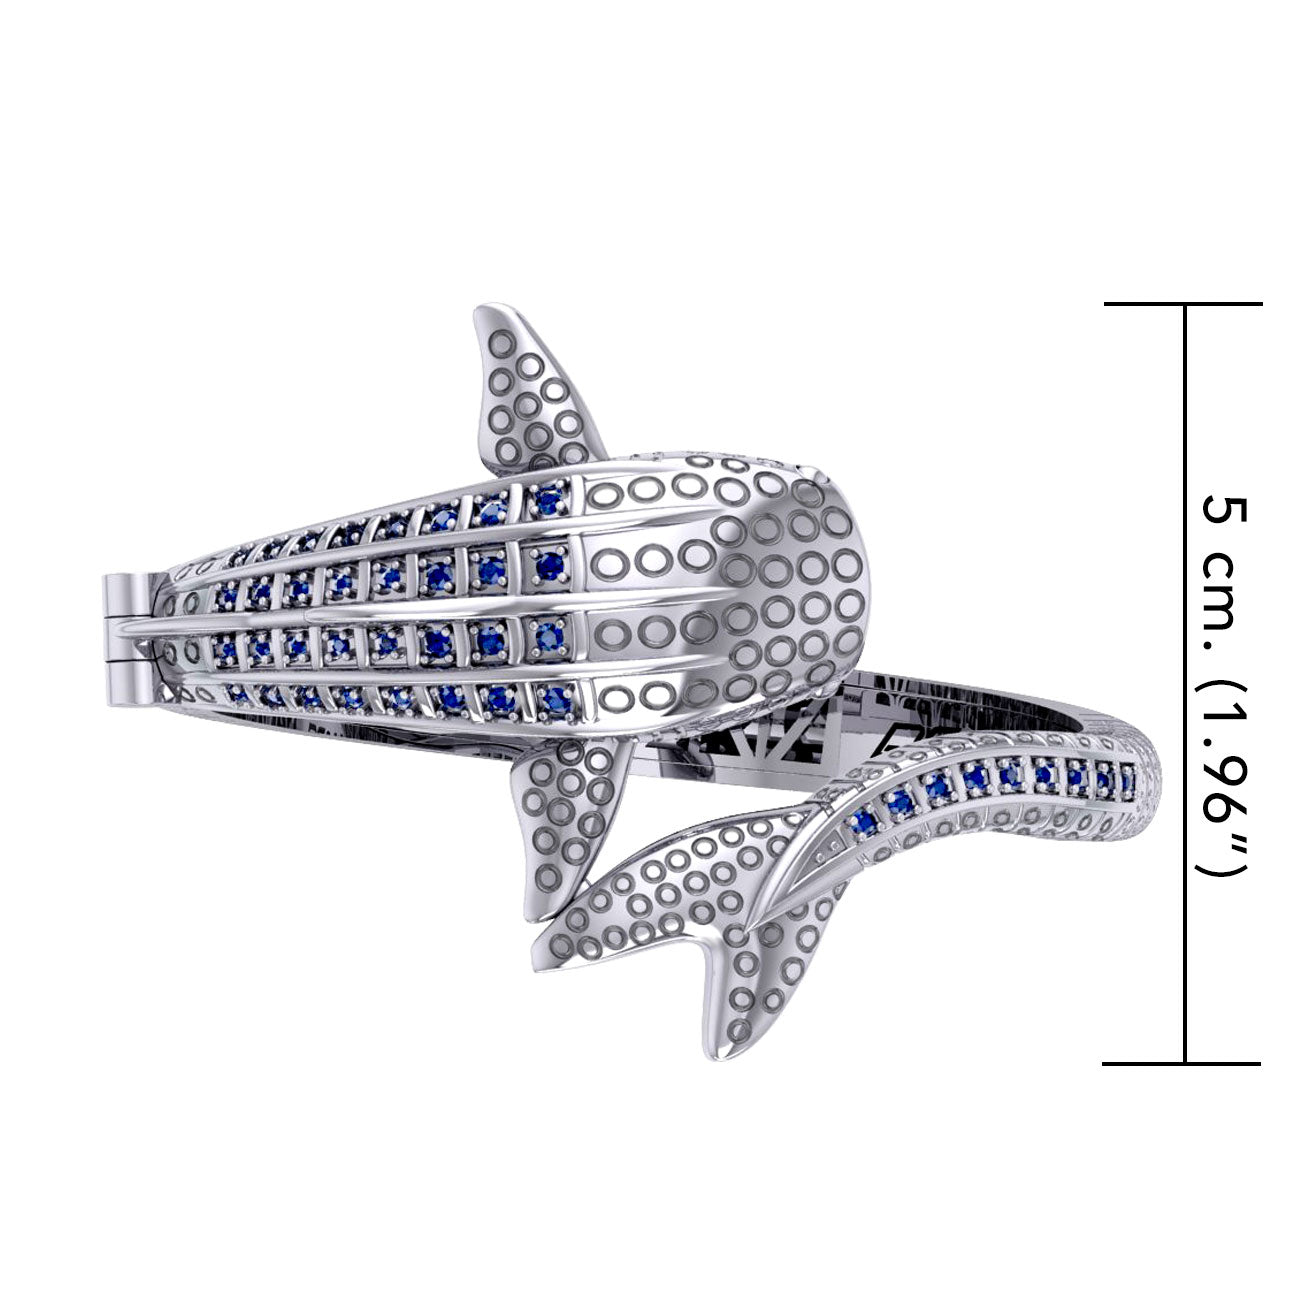 Dive Silver Whale Shark Silver Cuff Bracelet with Gemstones and Locking System TBA300